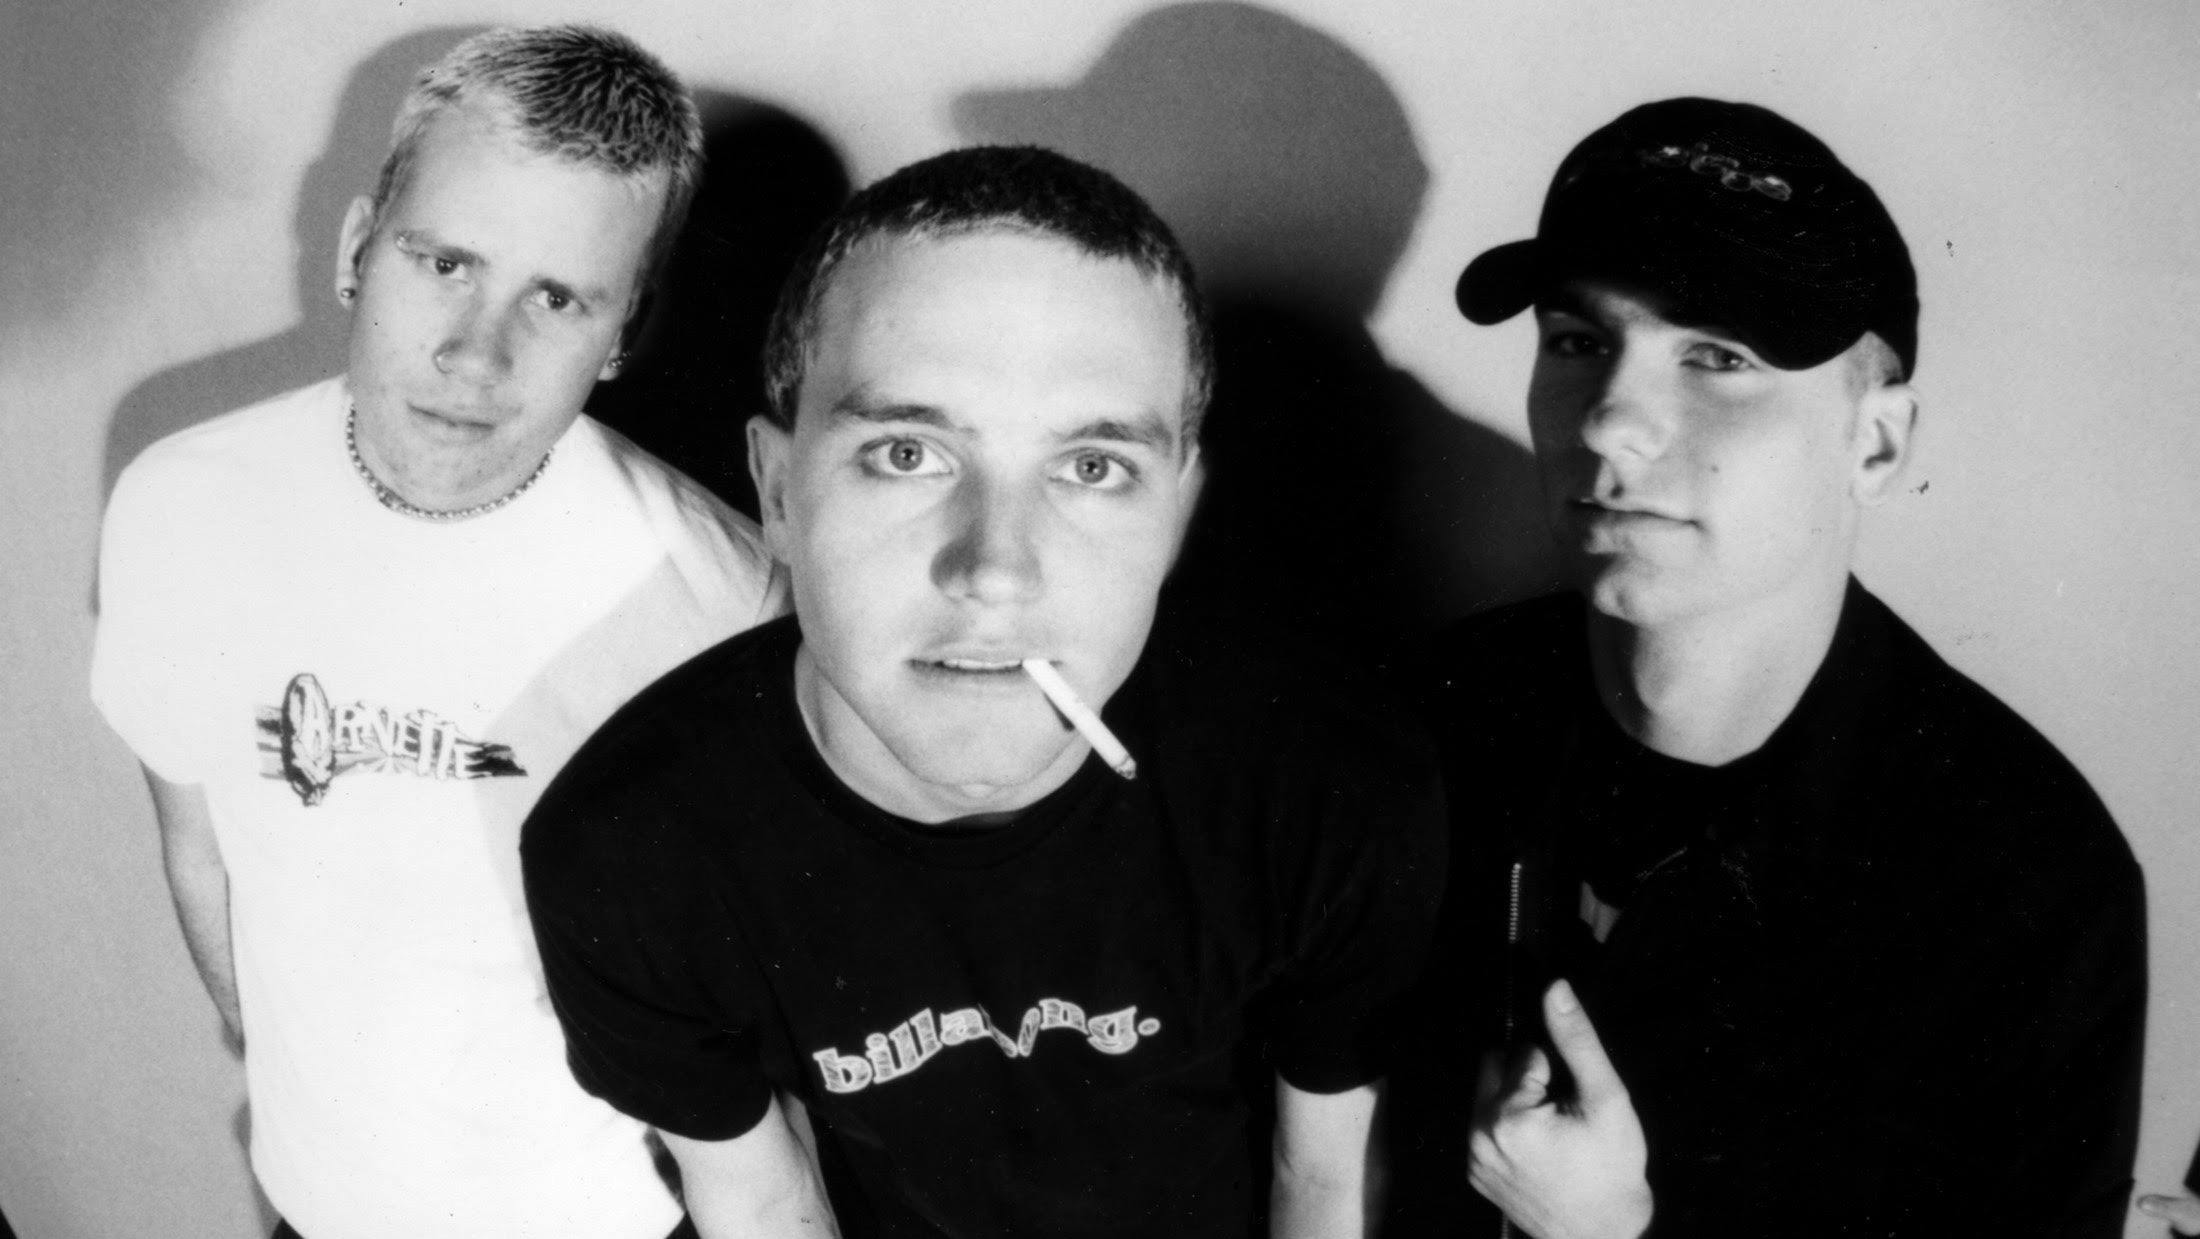 Tom DeLonge Reflects On The First Song He Wrote For blink-182